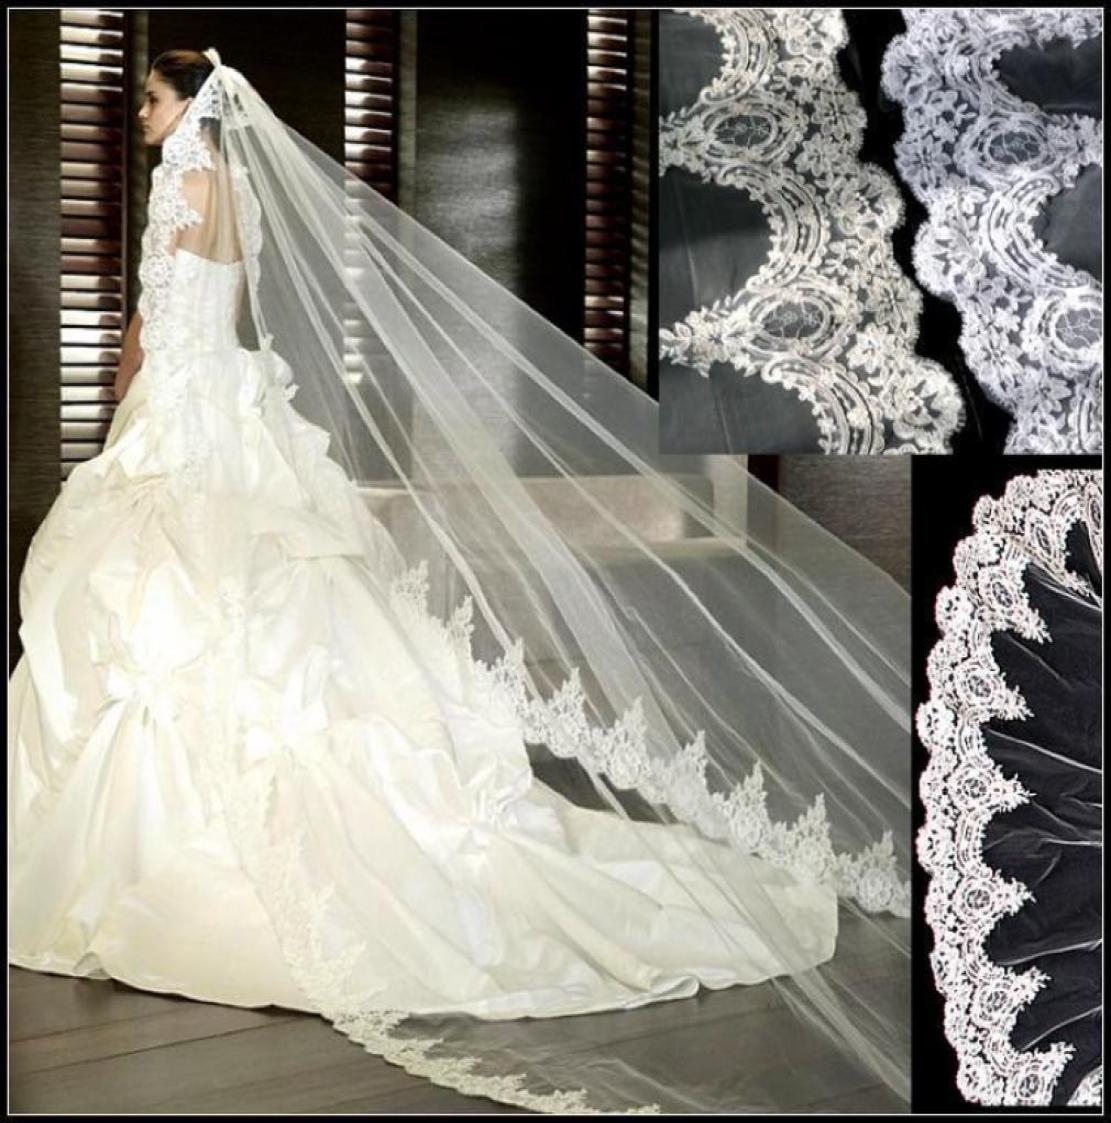 

Luxury White Ivory Wedding Veil Bridal Veil Lace Appliqued 3 Meters Cathedral Long Veils For Wedding Dress1089963